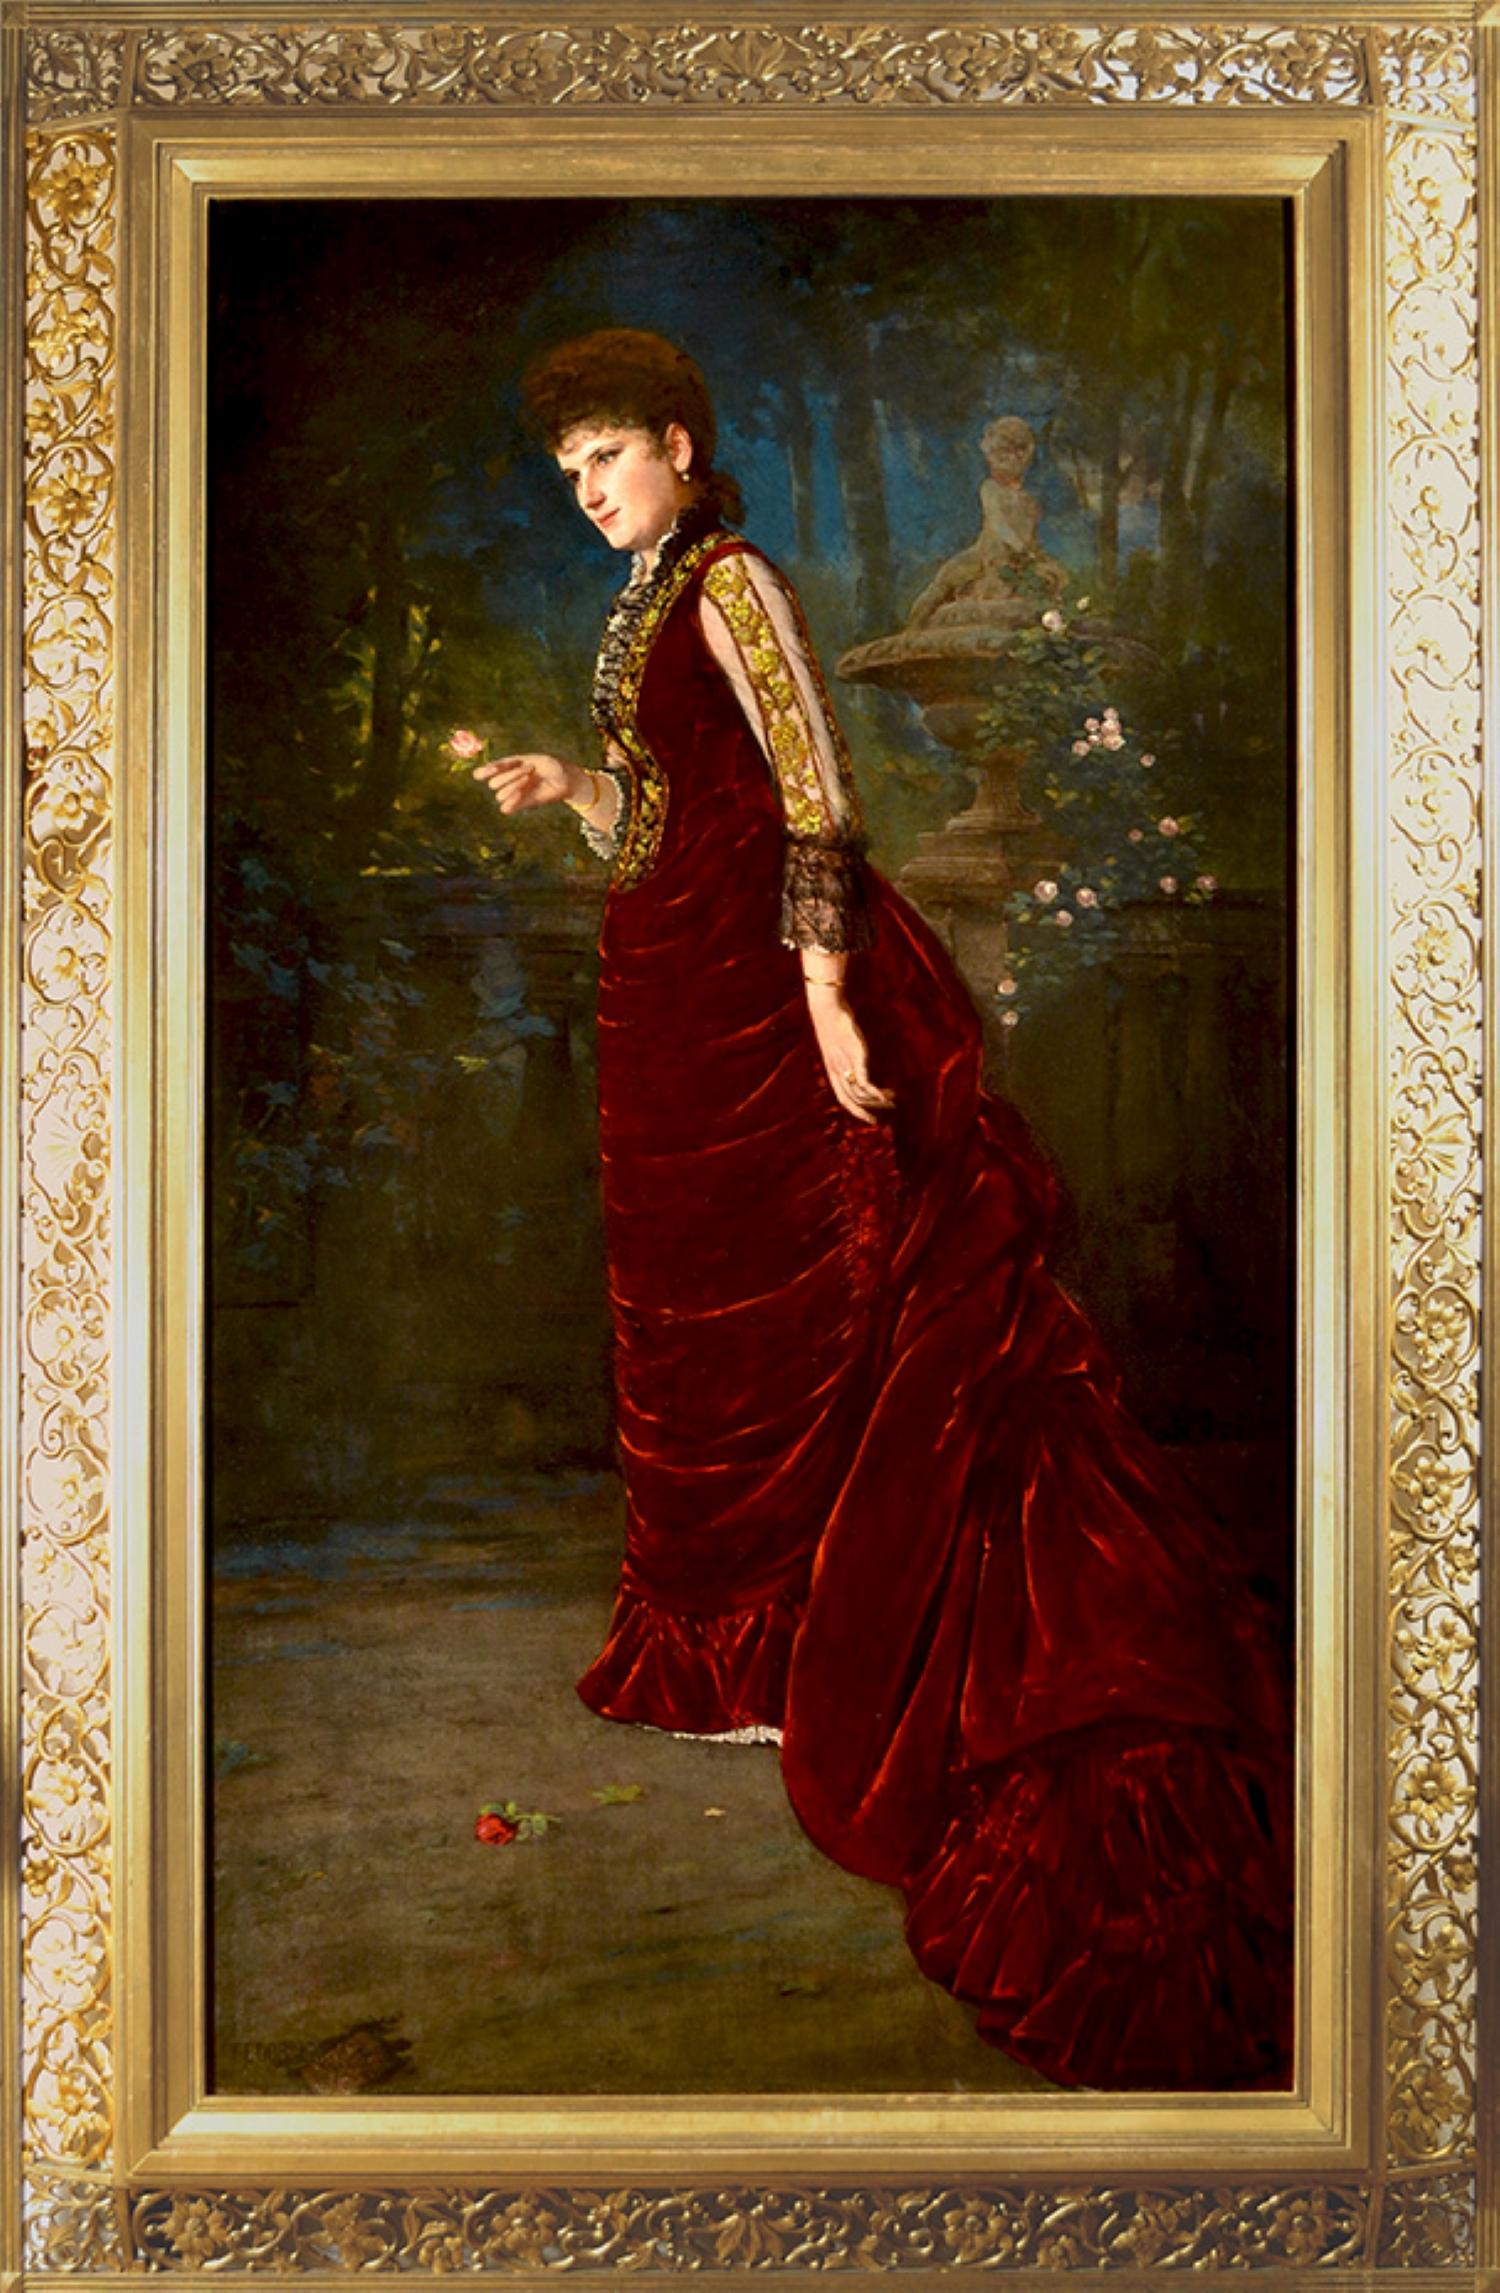  Full length Portrait of Jeannie Netter, wearing a Burgundy dress - Painting by Fedor Encke